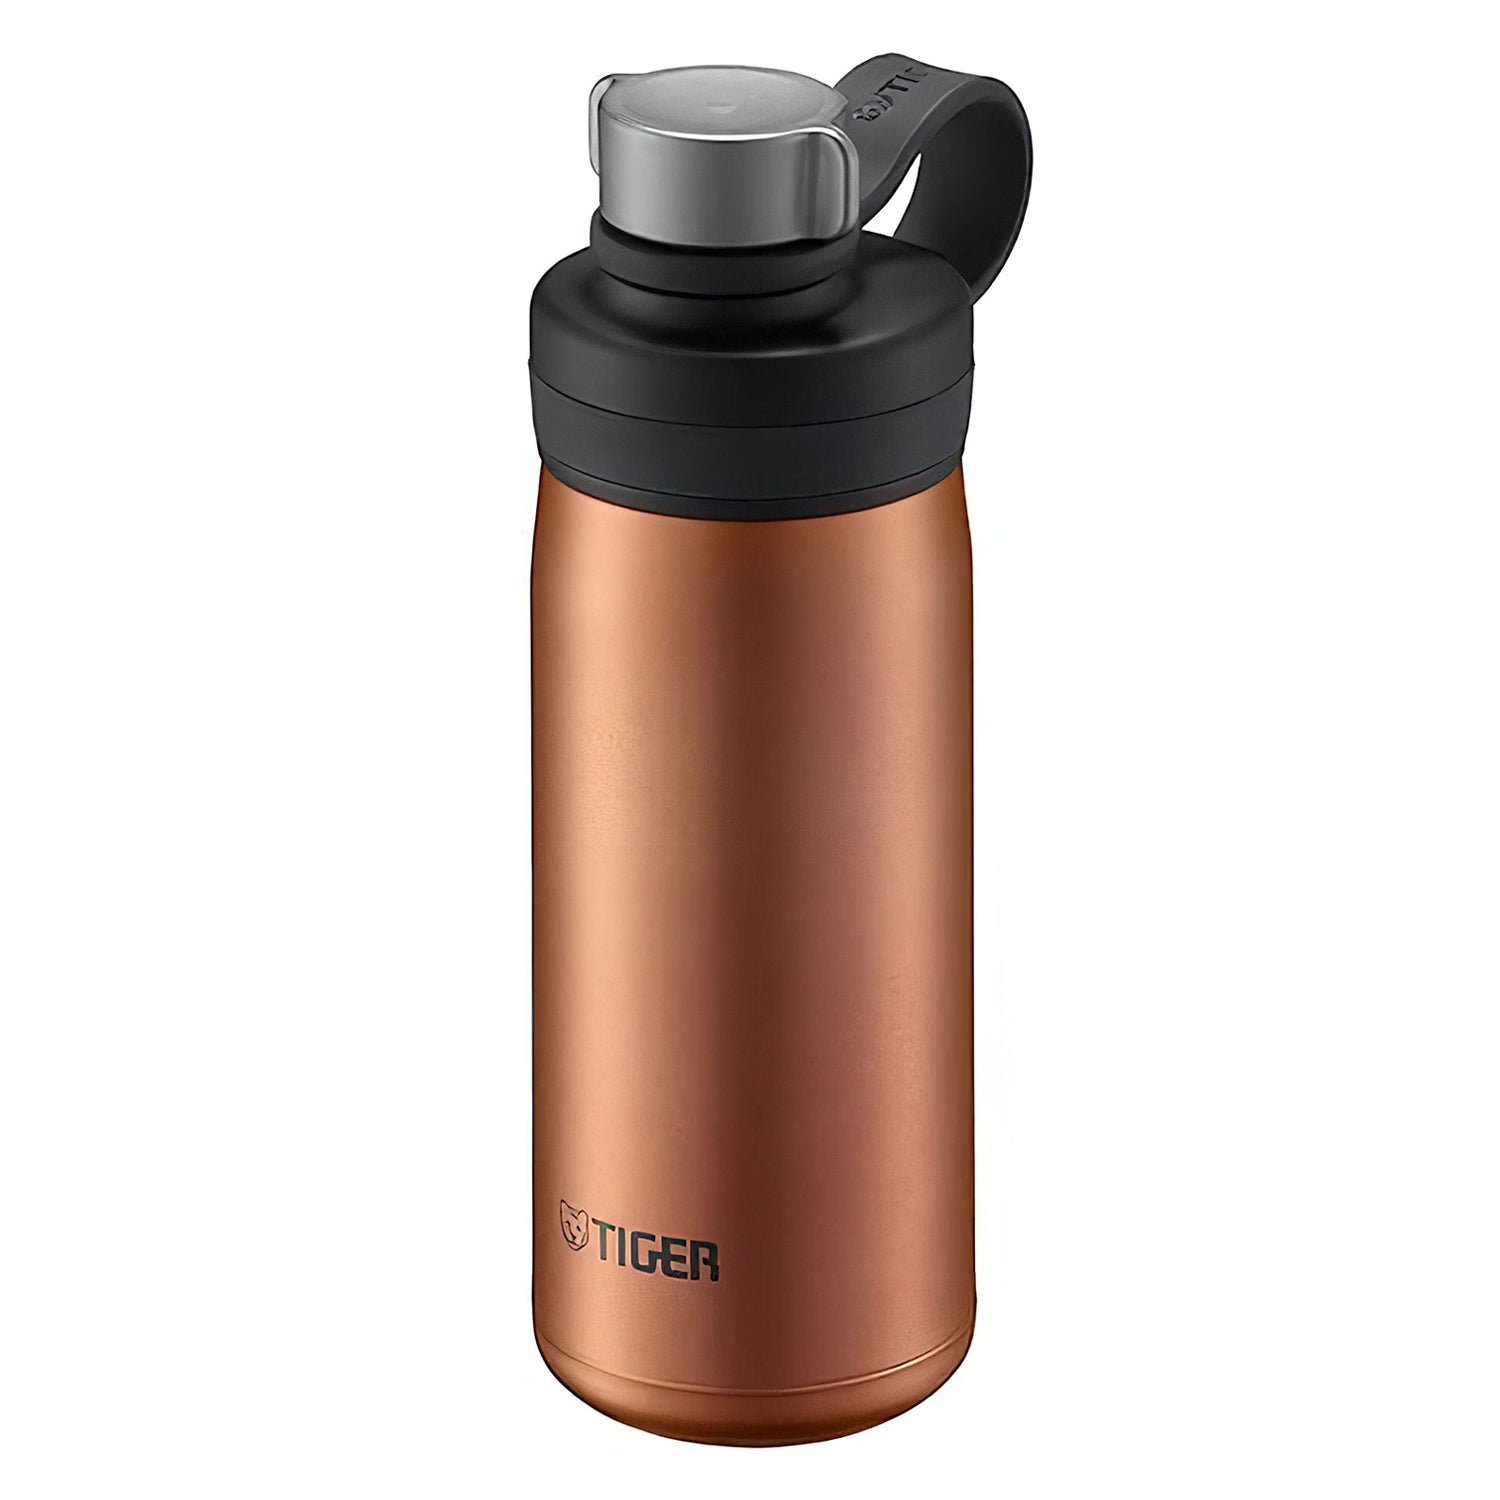 https://cdn.shopify.com/s/files/1/1610/3863/products/TigerStainlessSteelWaterBottleMTA-T050_1_2000x.jpg?v=1656983085